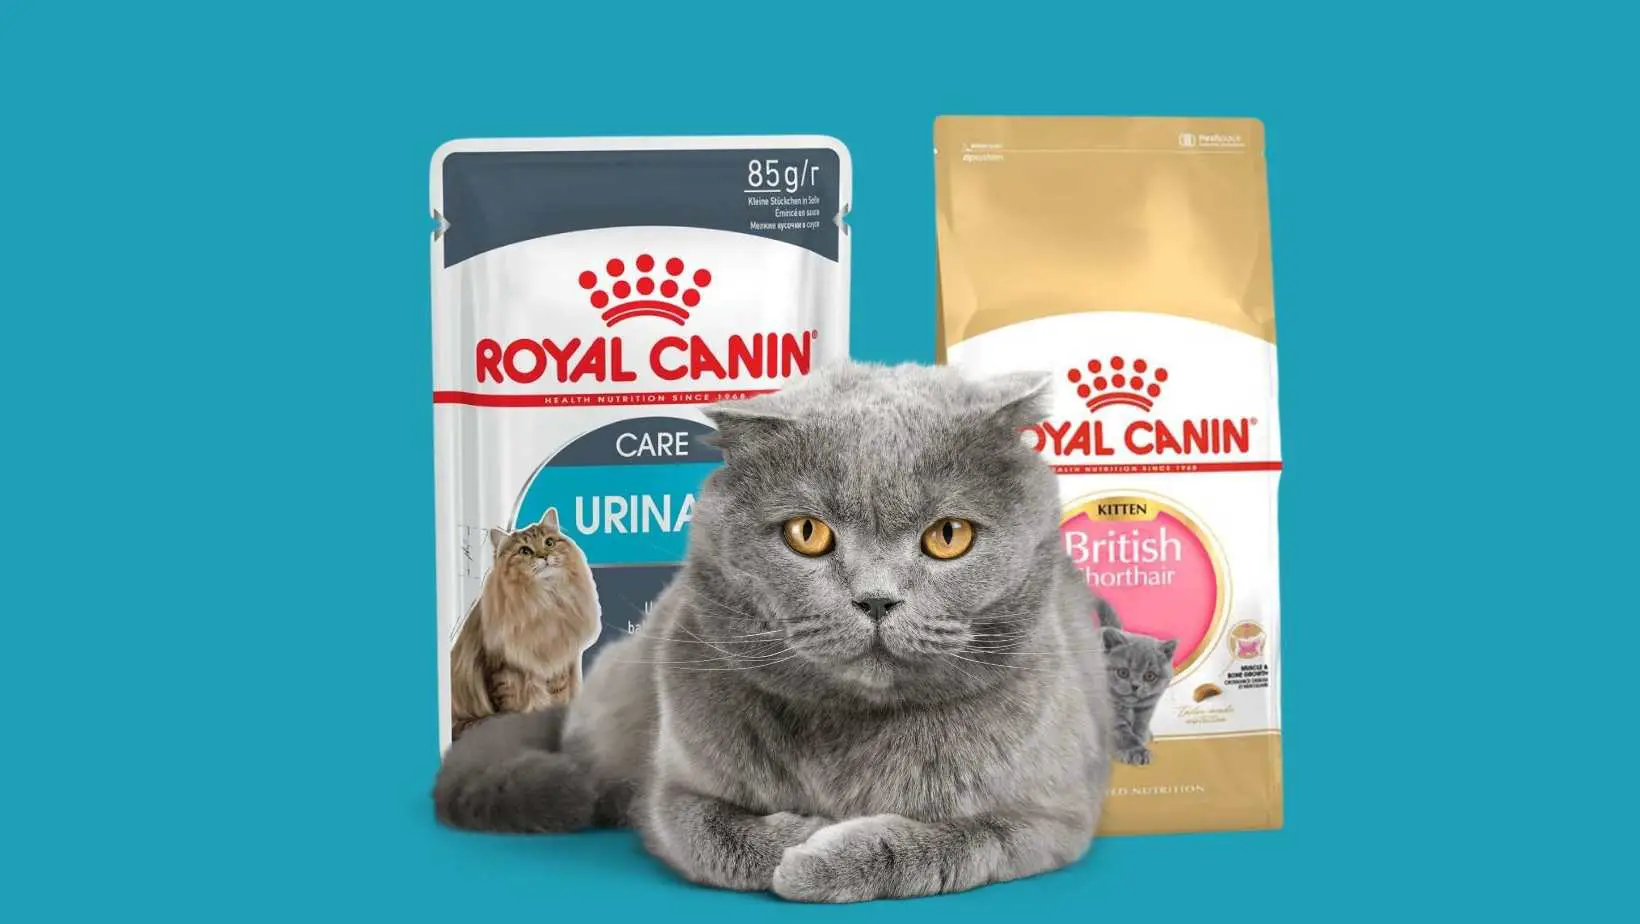 Royal Canin Cat Food Is a Must for Your Sick Cat